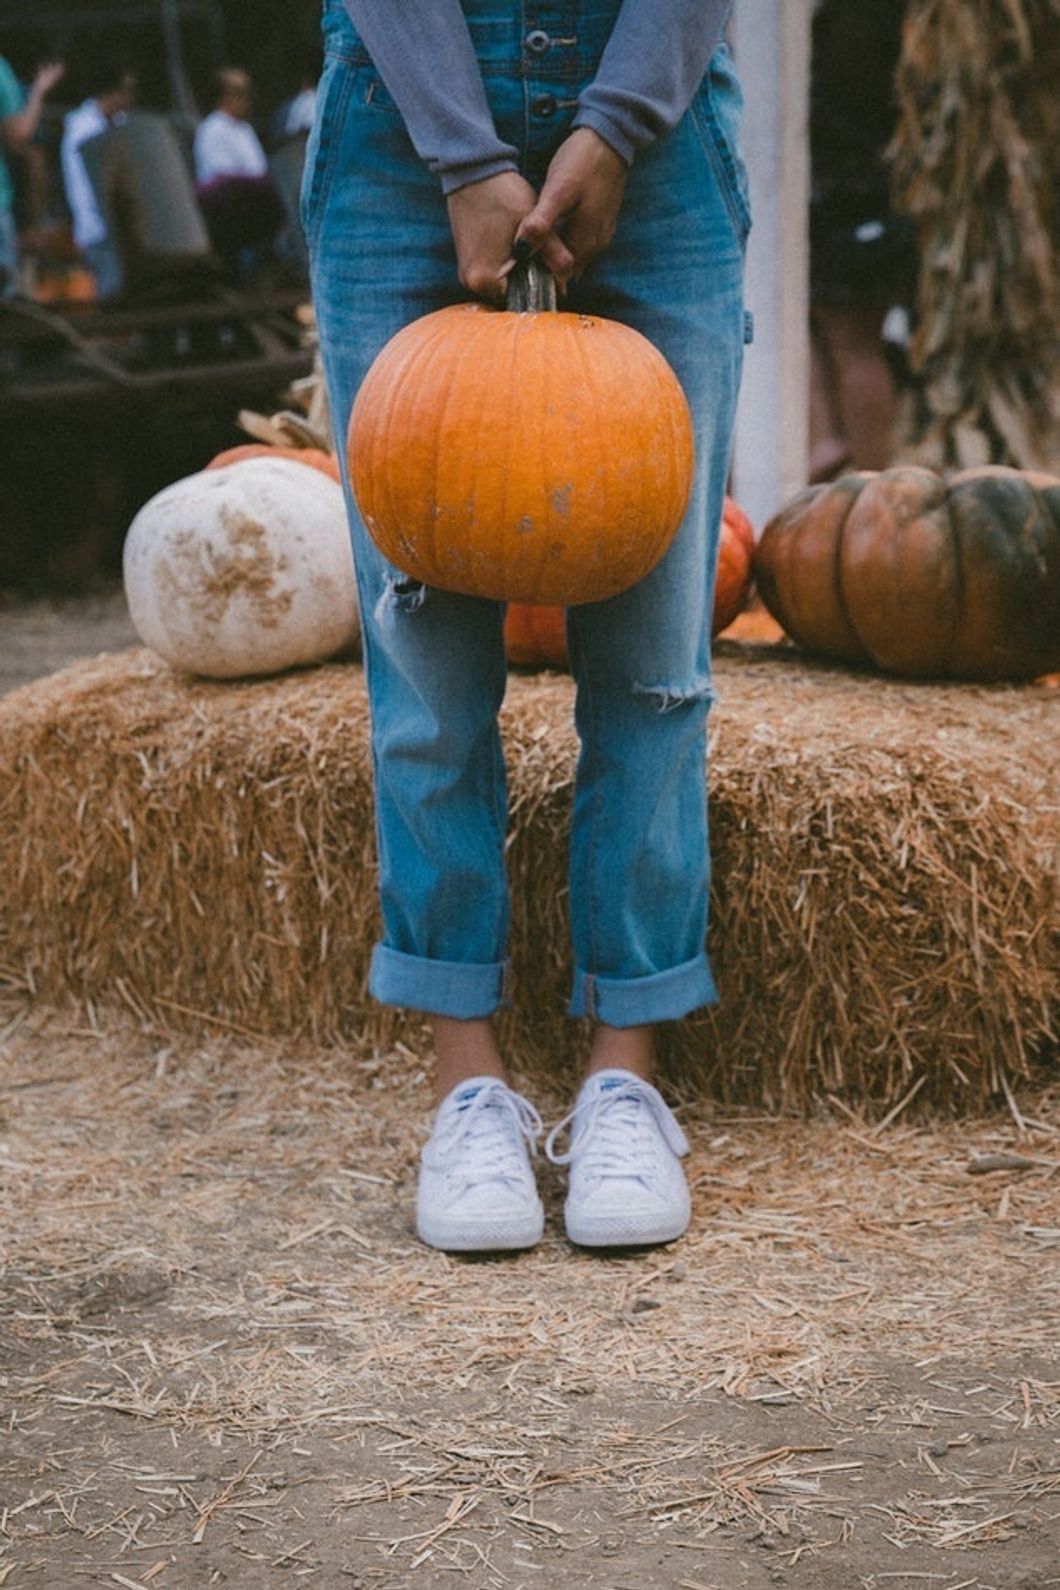 4 Things To Do This Halloween If You Don't Have Any Plans